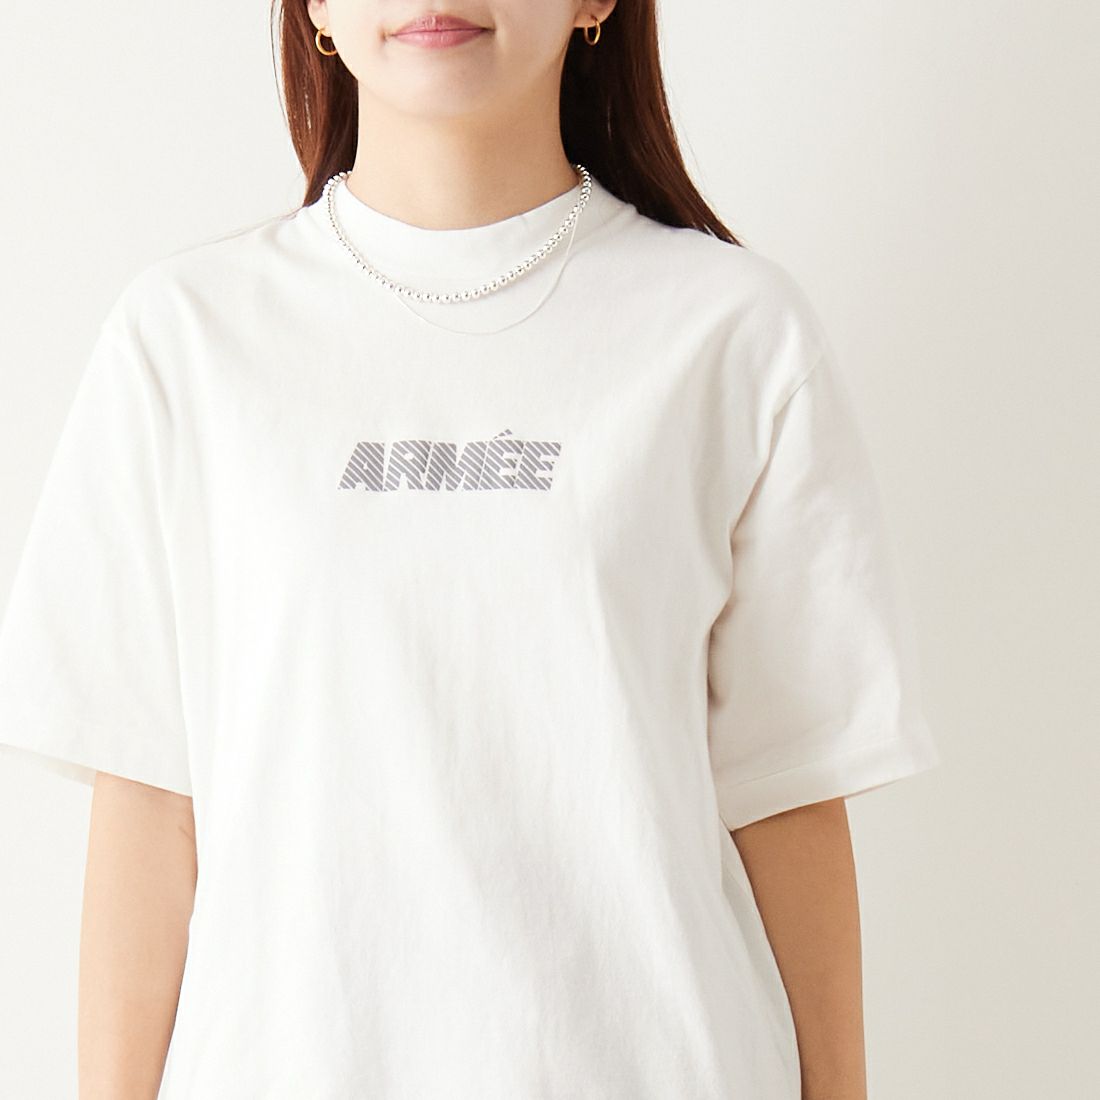 blurhms ROOTSTOCK [ブラームス ルーツストック] スタンダードプリントTシャツ [BROOTS24S33C] 03 WHT/GRY